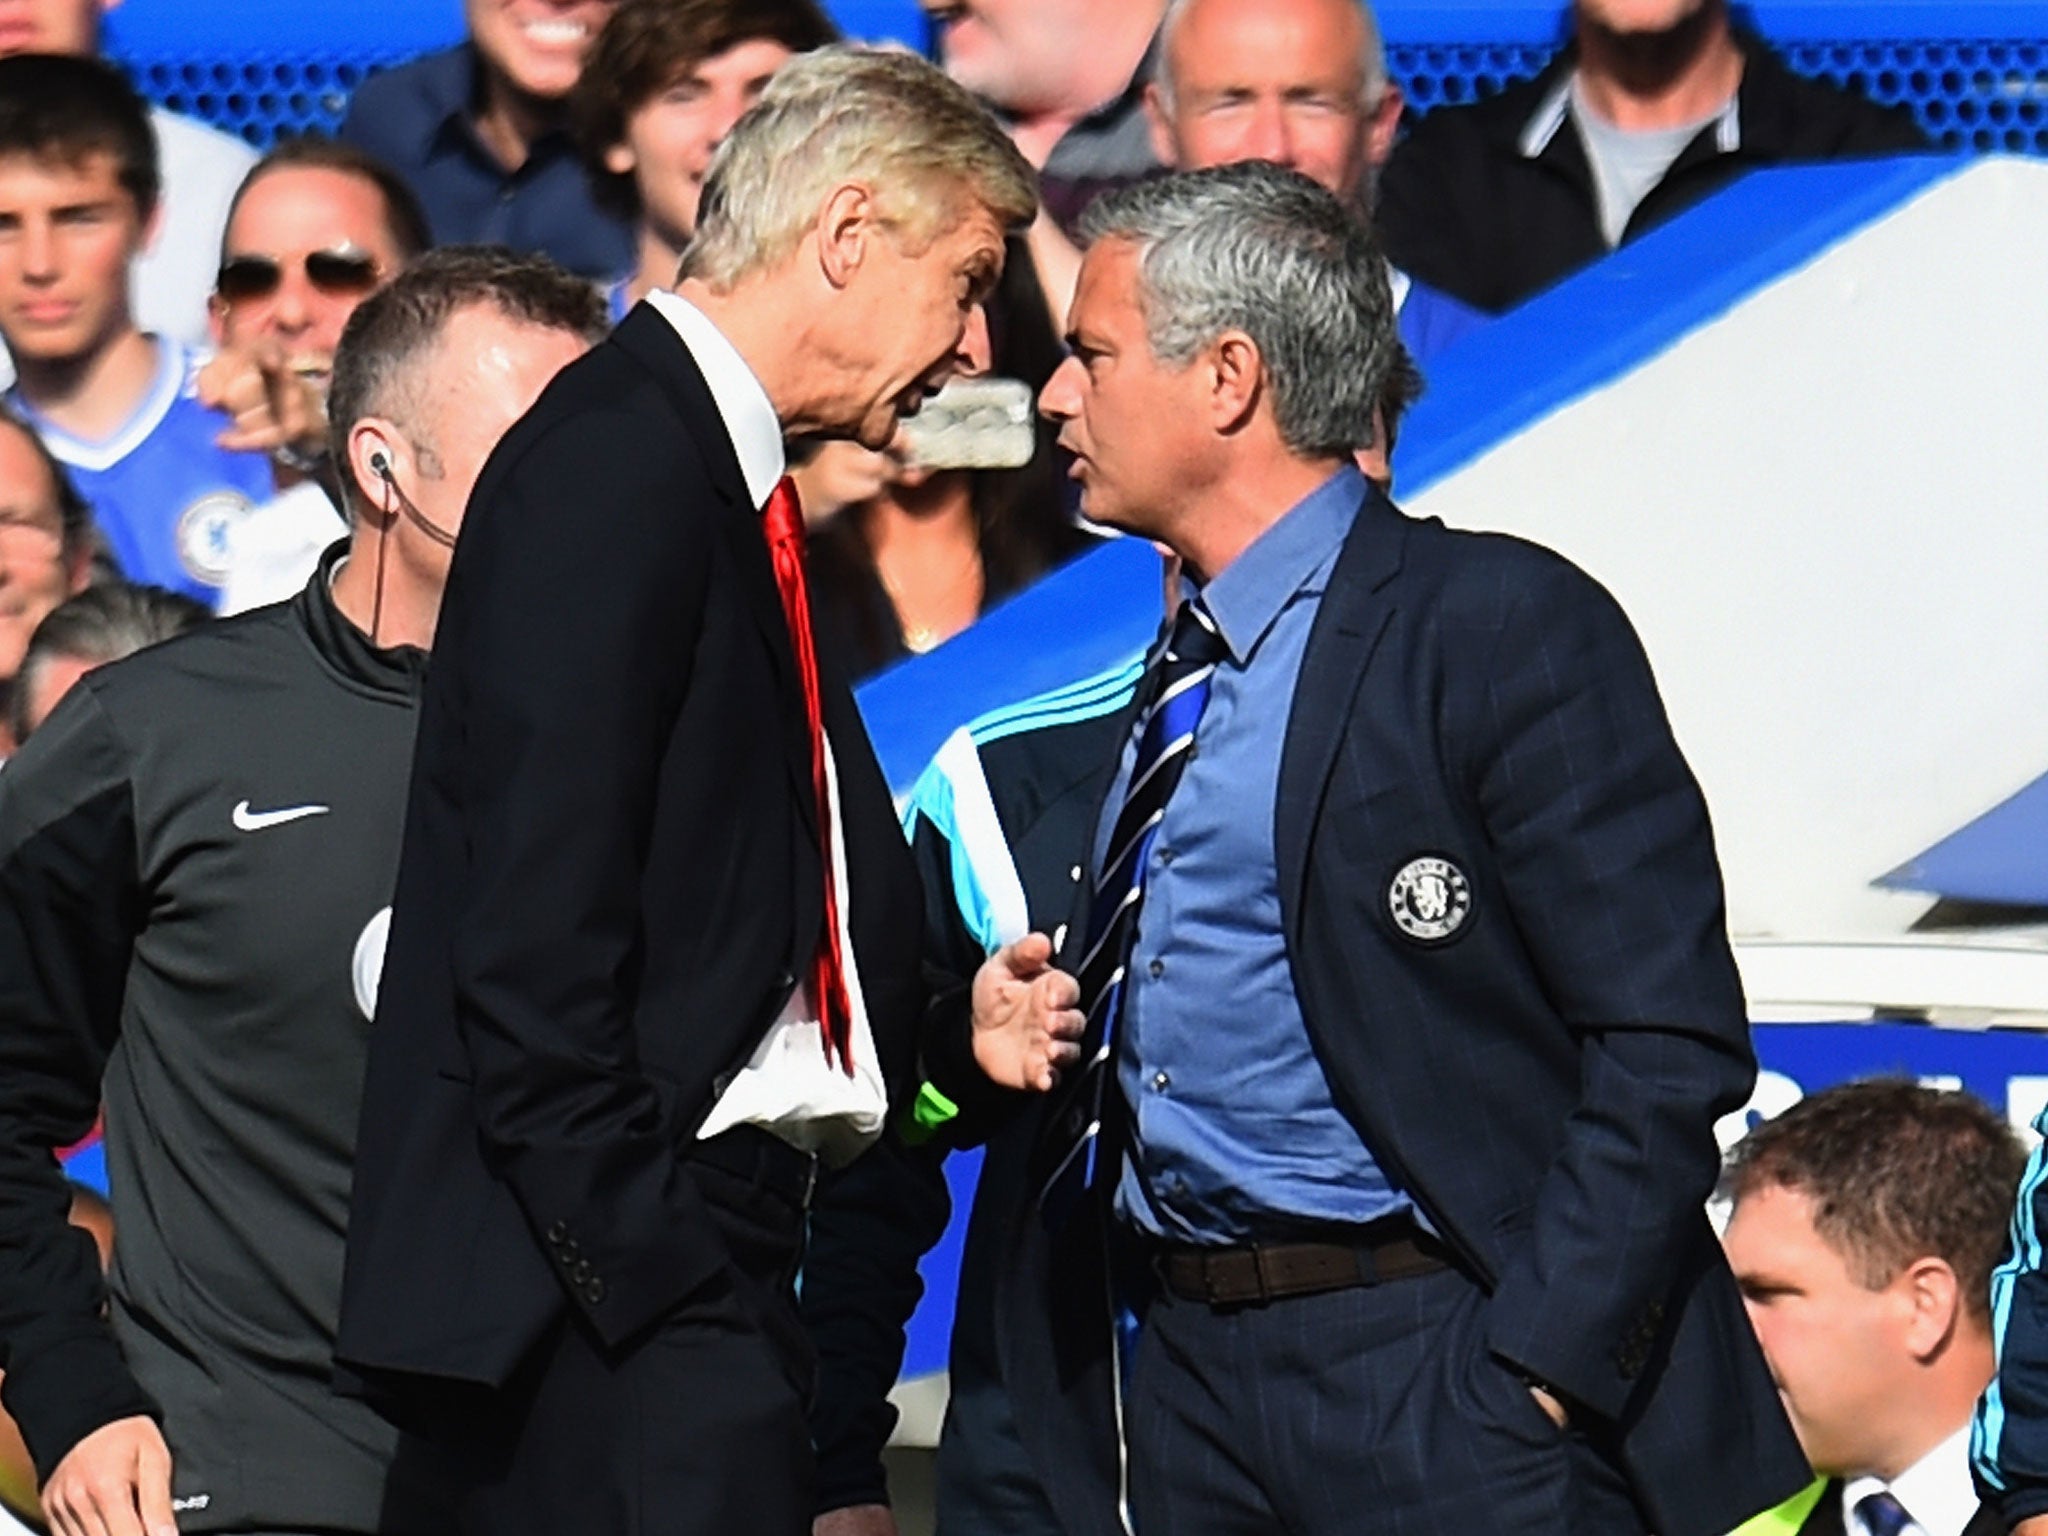 Wenger and Mourinho squared up to each other earlier this season when the teams last met